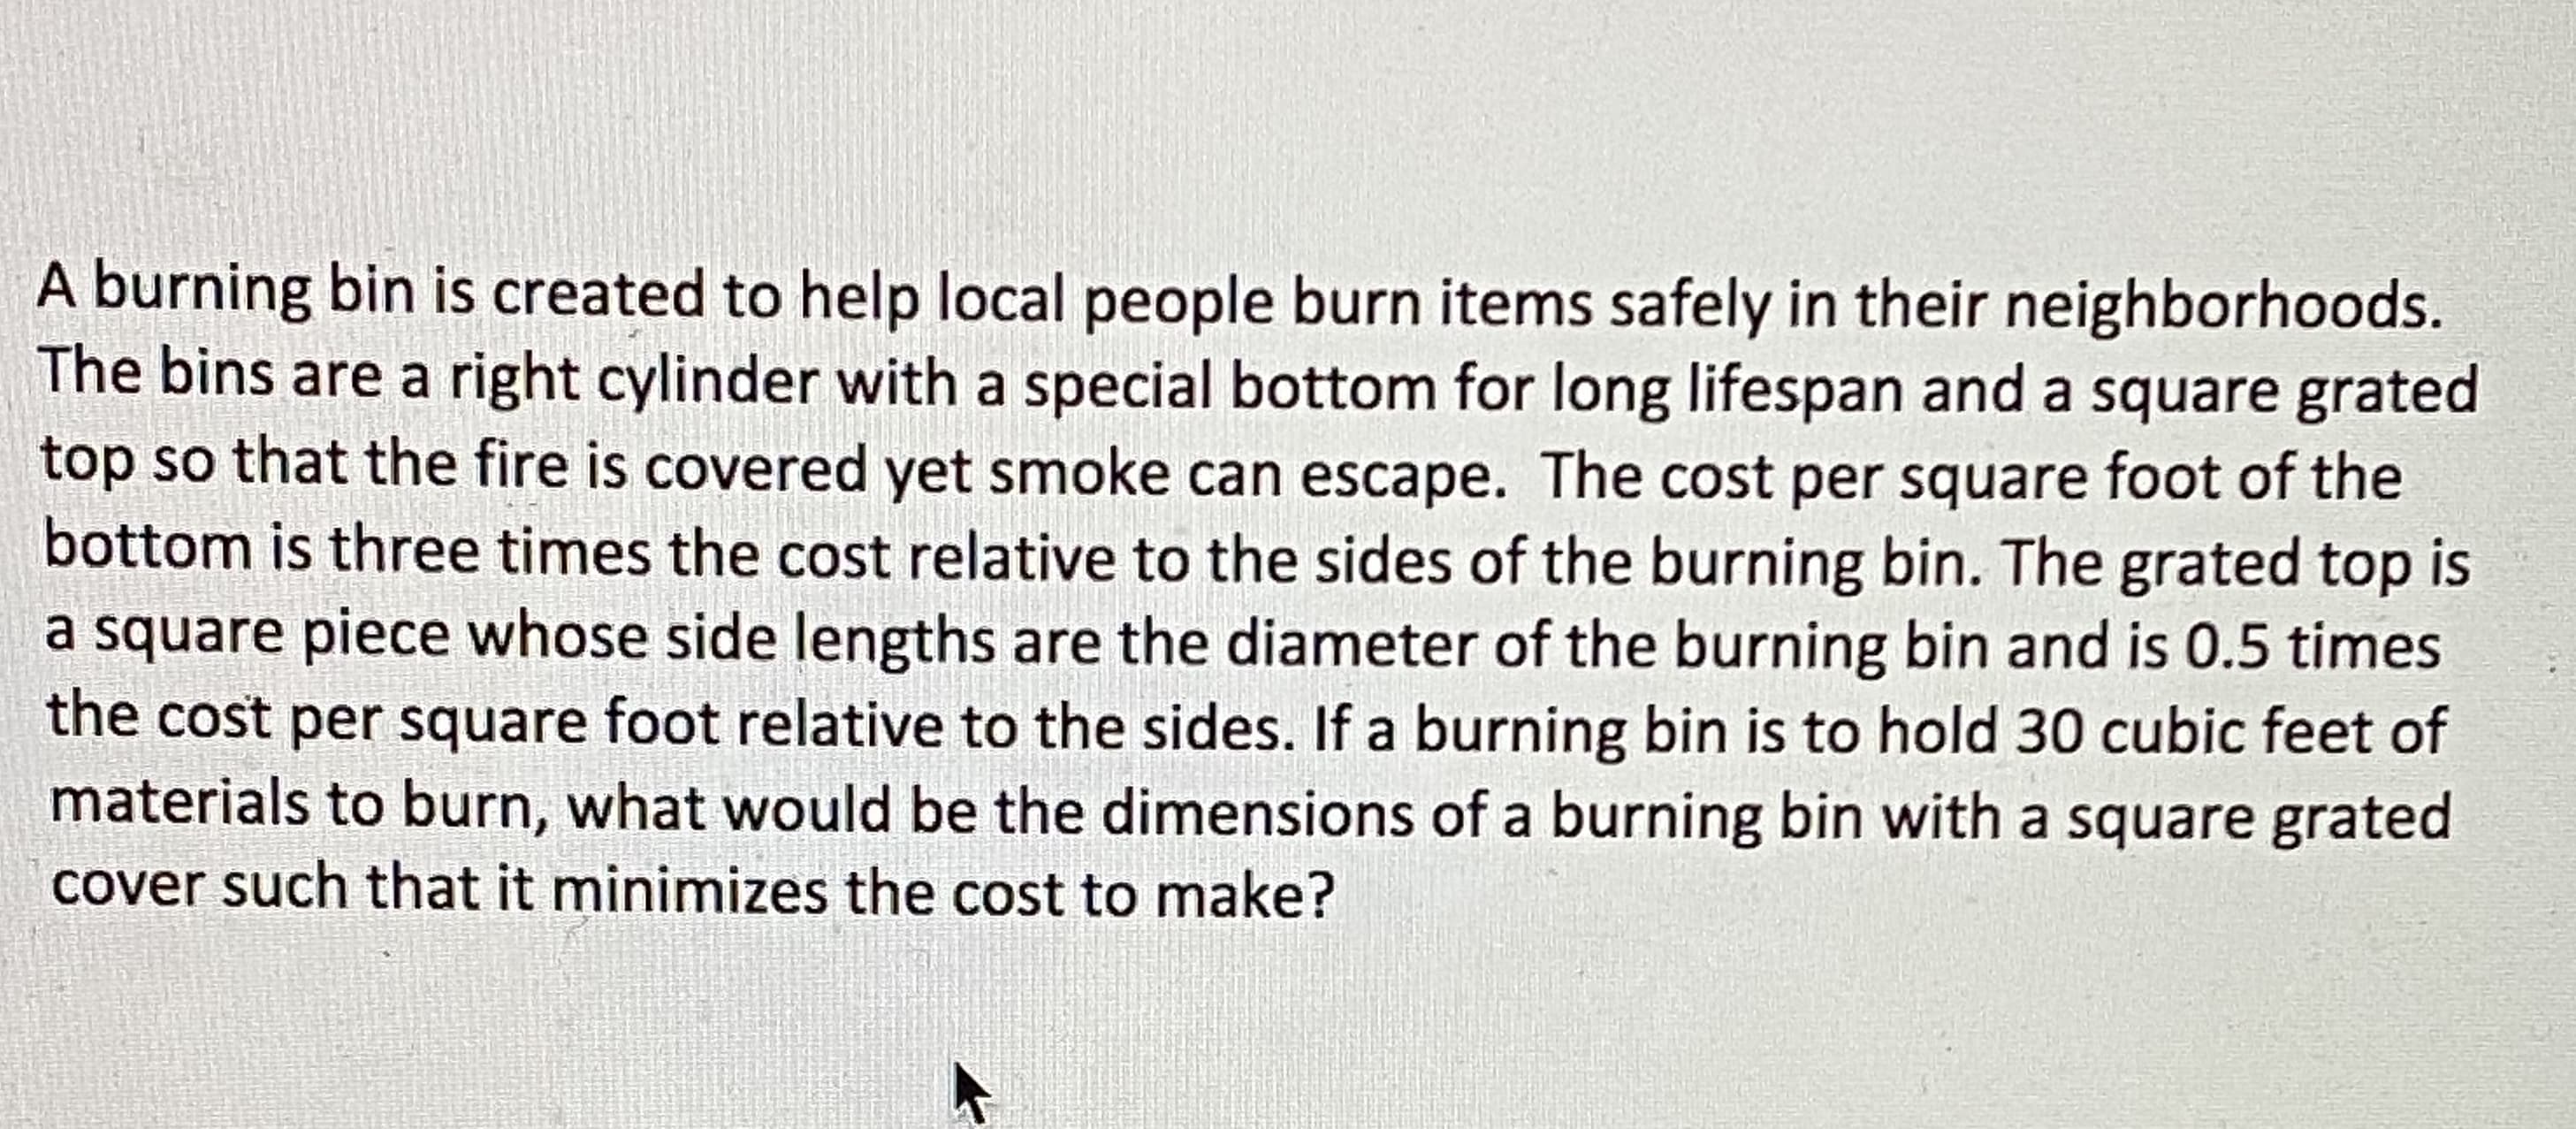 A burning bin is created to help local people burn items safely in their neighborhoods.
The bins are a right cylinder with a special bottom for long lifespan and a square grated
top so that the fire is covered yet smoke can escape. The cost per square foot of the
bottom is three times the cost relative to the sides of the burning bin. The grated top is
a square piece whose side lengths are the diameter of the burning bin and is 0.5 times
the cost per square foot relative to the sides. If a burning bin is to hold 30 cubic feet of
materials to burn, what would be the dimensions of a burning bin with a square grated
cover such that it minimizes the cost to make?
